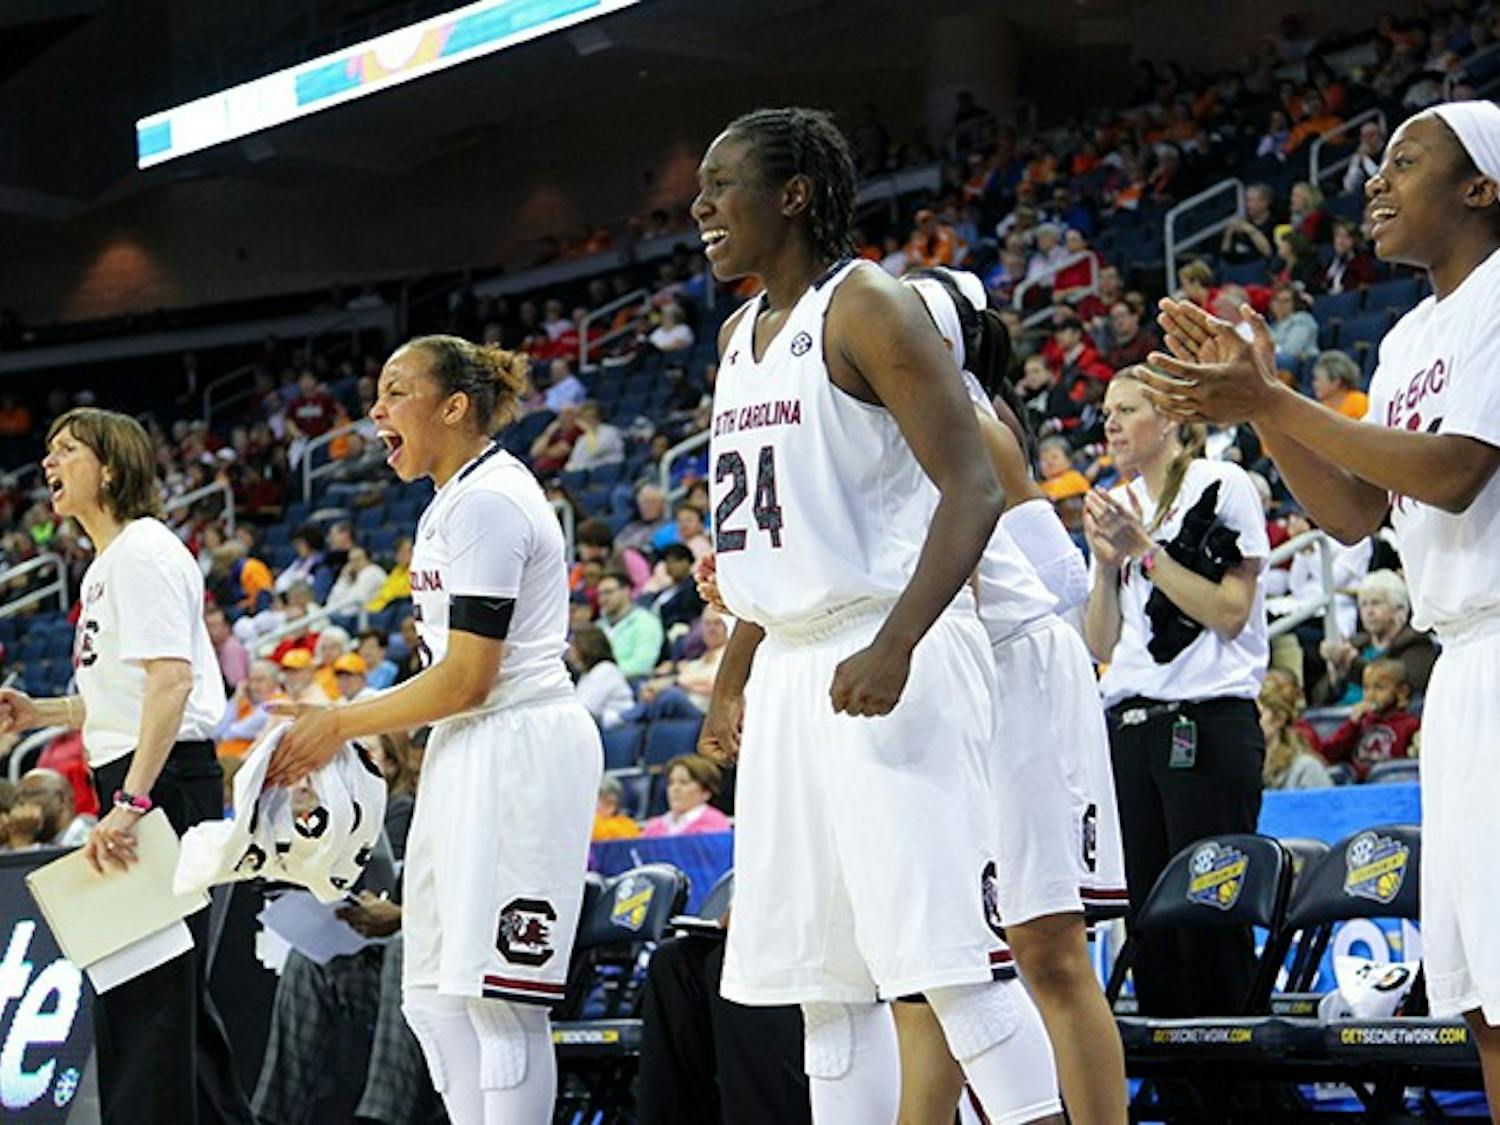 South Carolina Gamecocks celebrate after beating Georgia to advance in SEC tournament play at The Arena at Gwinnett Center, in Duluth, Ga., Friday, March 7, 2014. South Carolina won 67-48. (Tracy Glantz/The State/MCT)